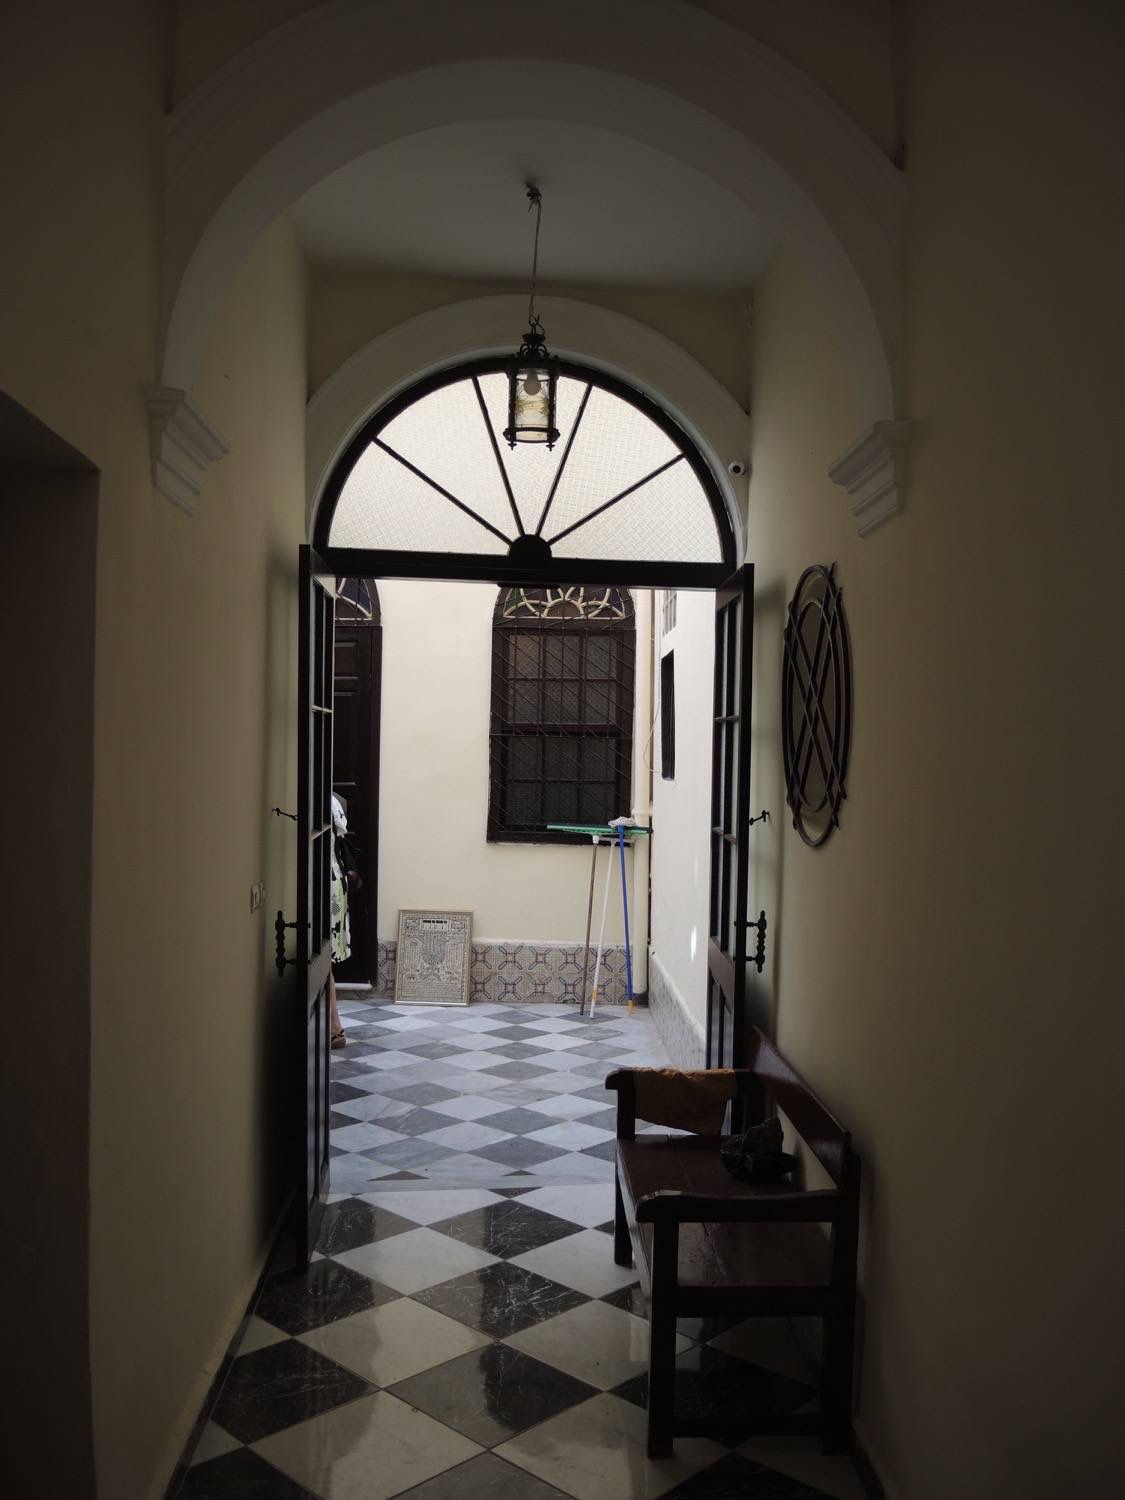 View toward the entrance from inside the entry hall